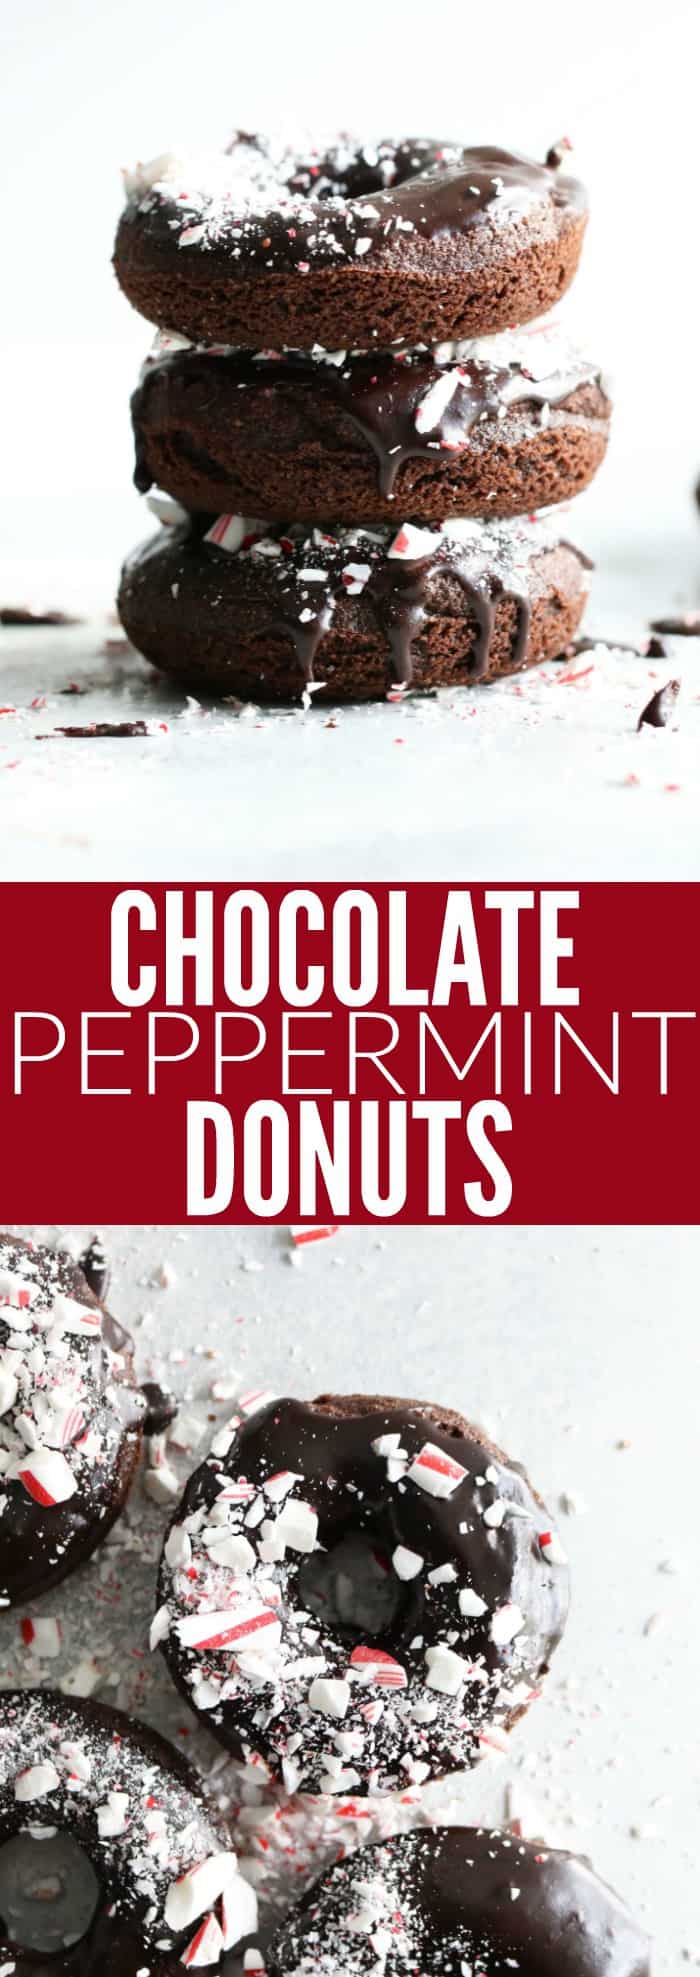 You'll love these low carb + gluten free Chocolate Peppermint Donuts! They're so delicious and have that perfect winter peppermint flavor! thetoastedpinenut.com #lowcarb #glutenfree #peppermint #donuts #chocolate